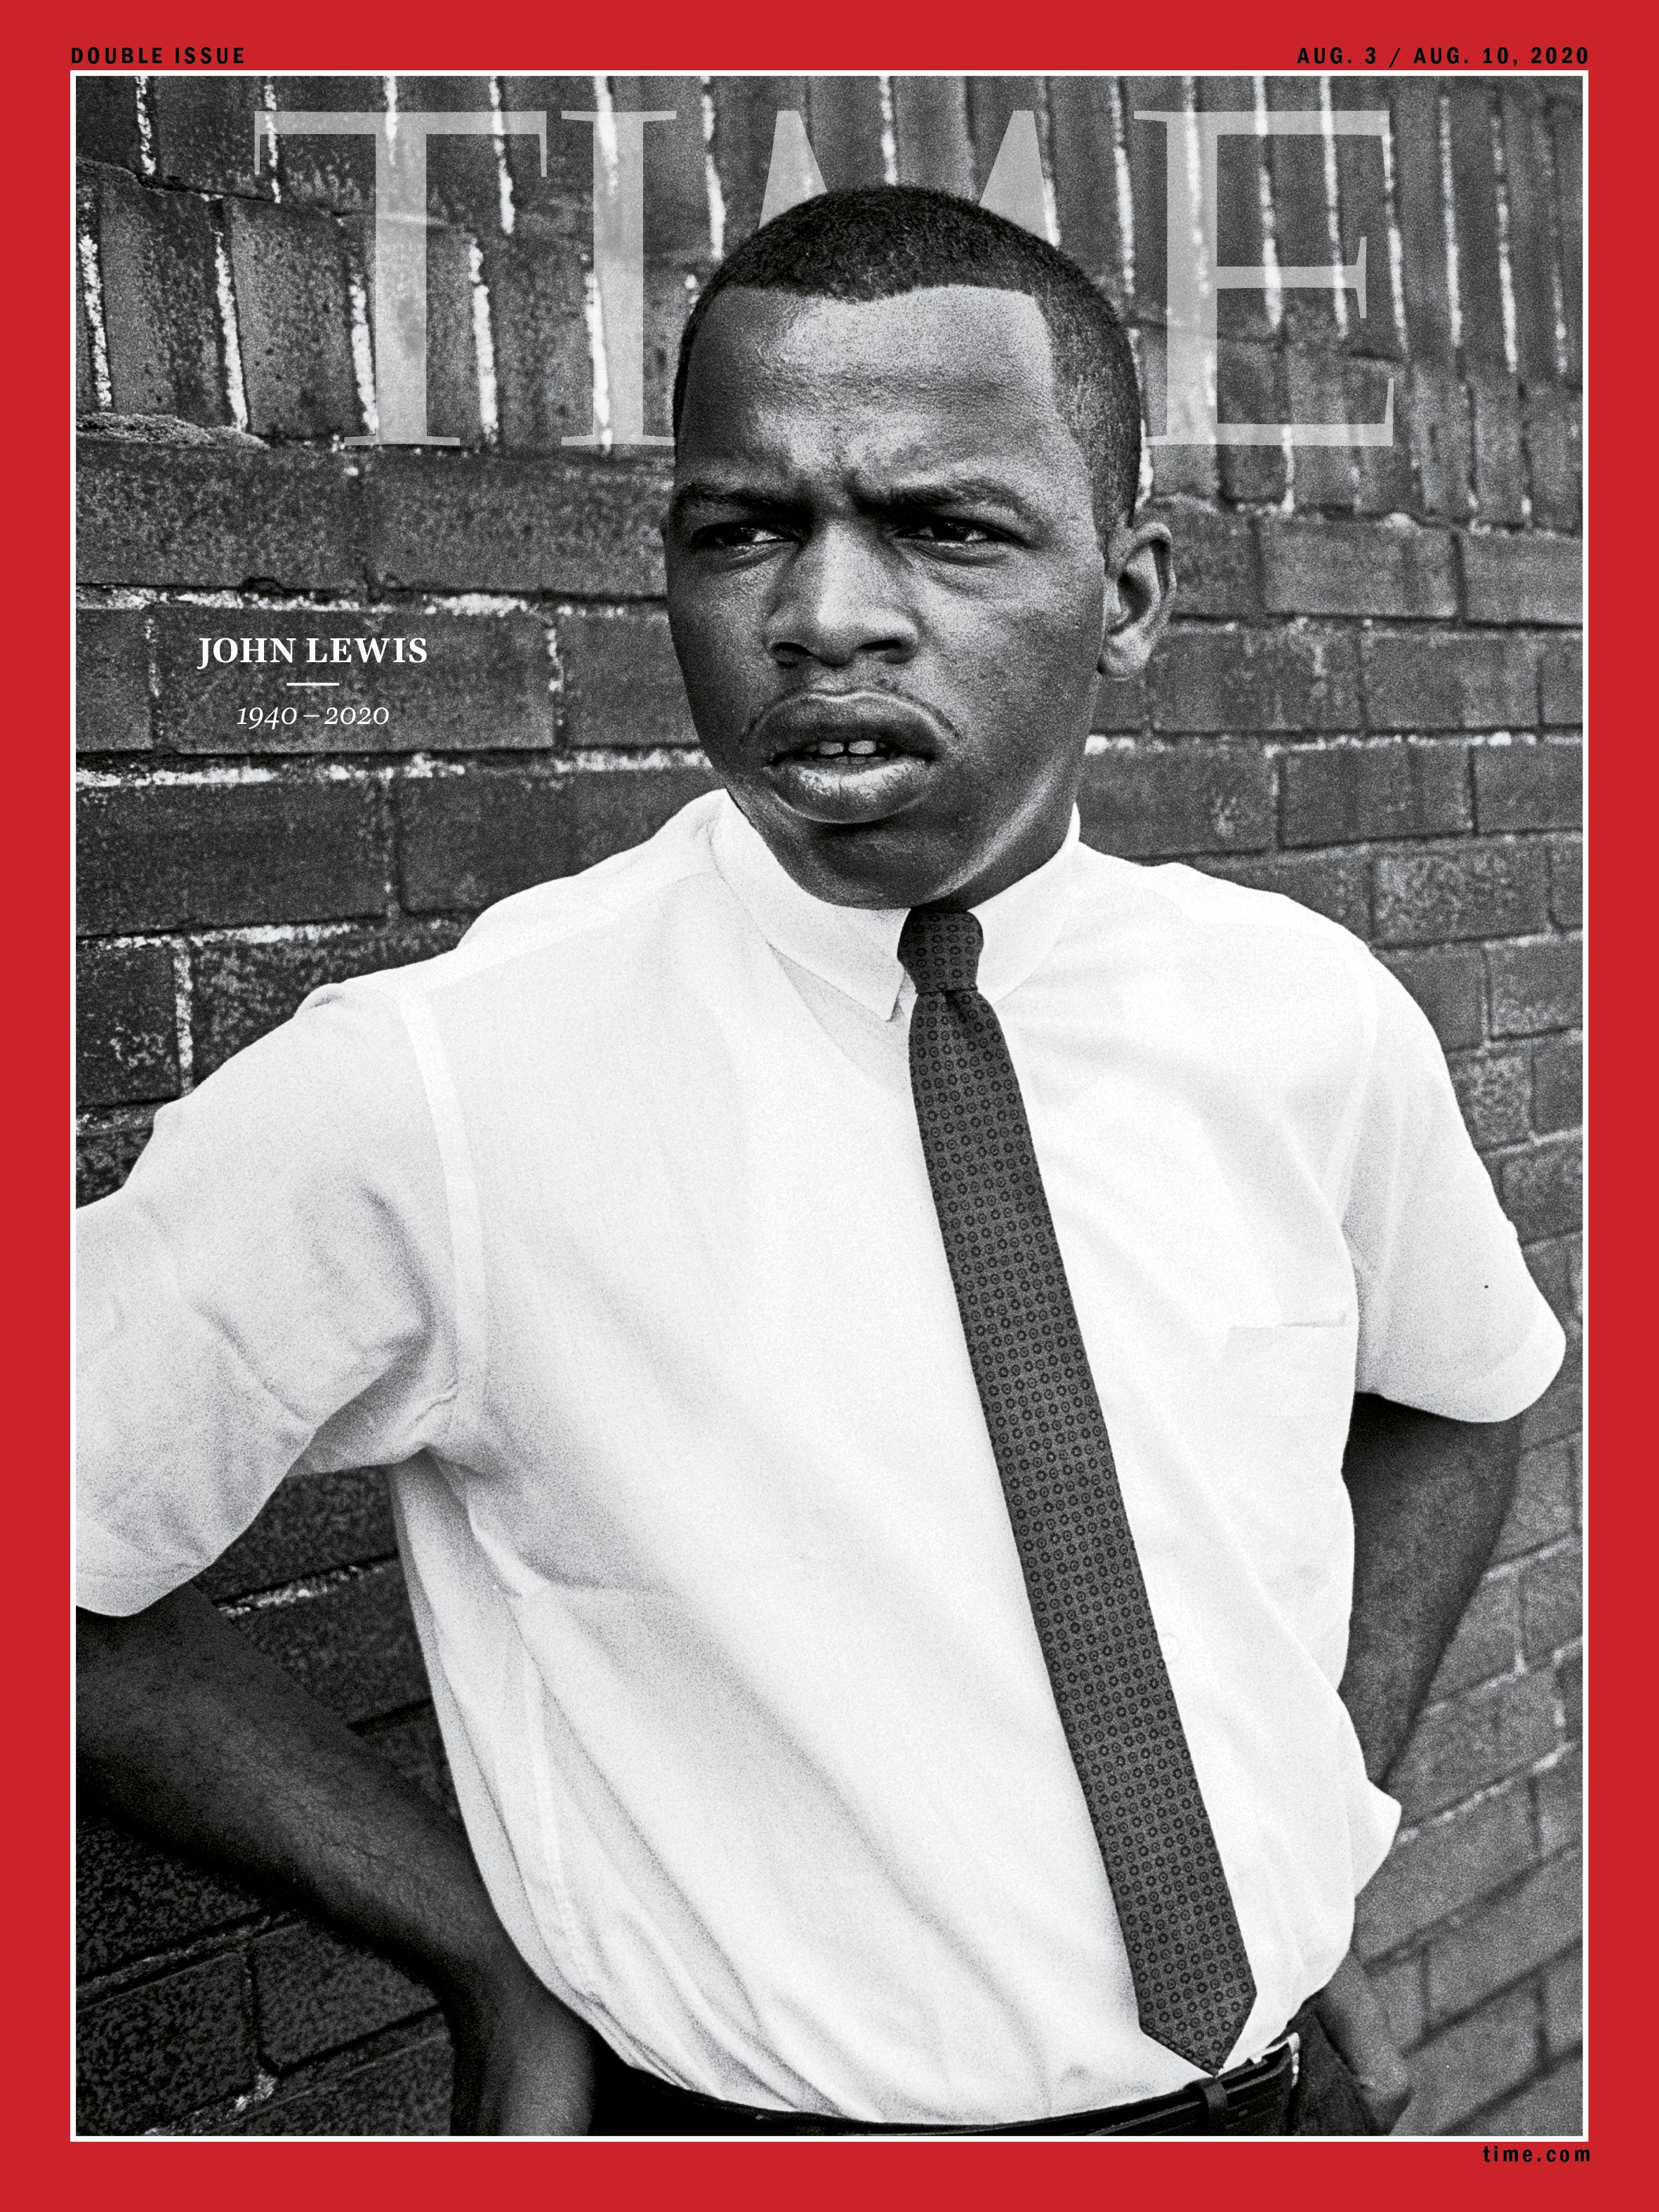 John Lewis cover of Time.